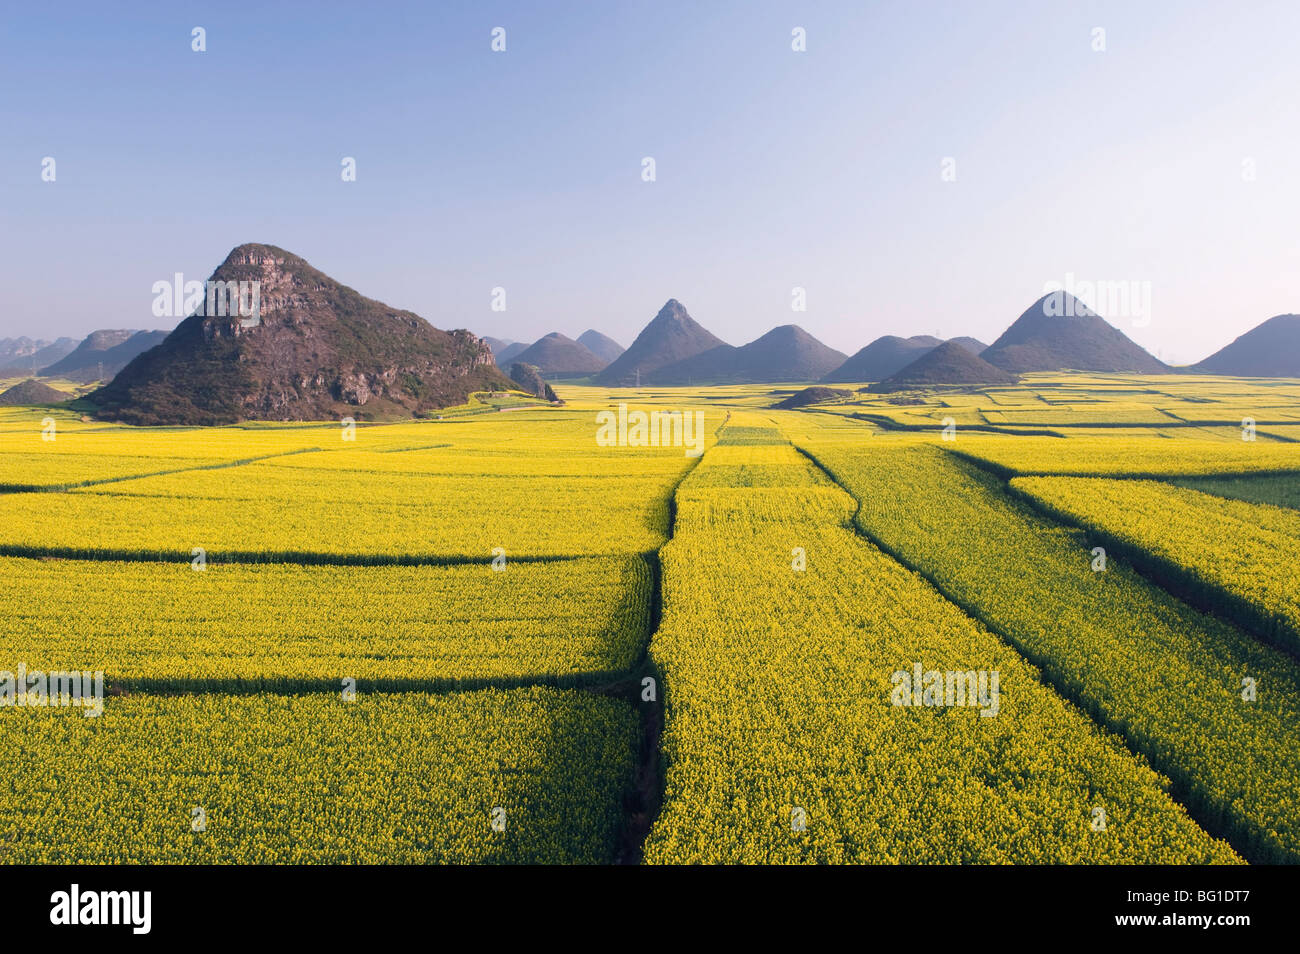 Fields of rapeseed flowers in bloom in Luoping, Yunnan Province, China, Asia Stock Photo